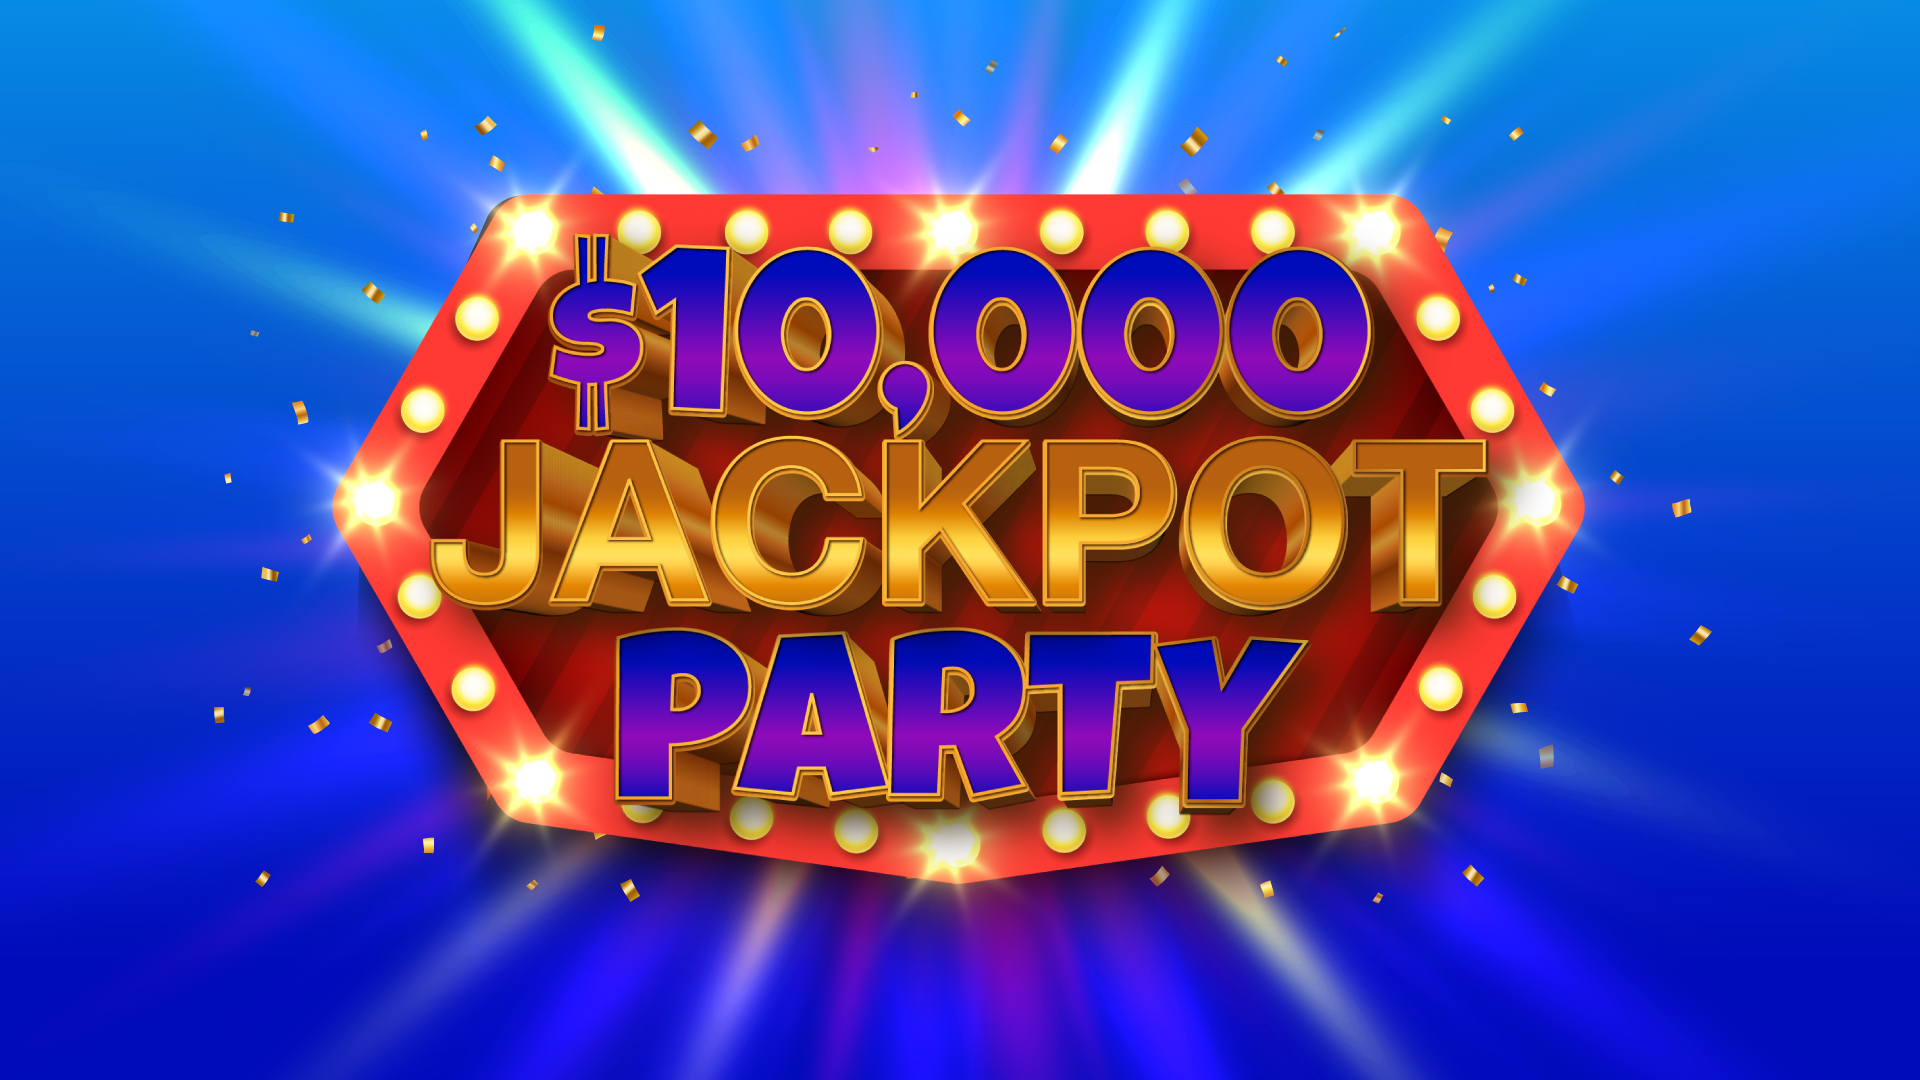 $10,000 Jackpot Party February 19, 2023 10 Winners Will Receive $1,000 In FREE Play! Any Jackpot Winner Between December 18, 2022 to February 18, 2023 Is Eligible To Participate